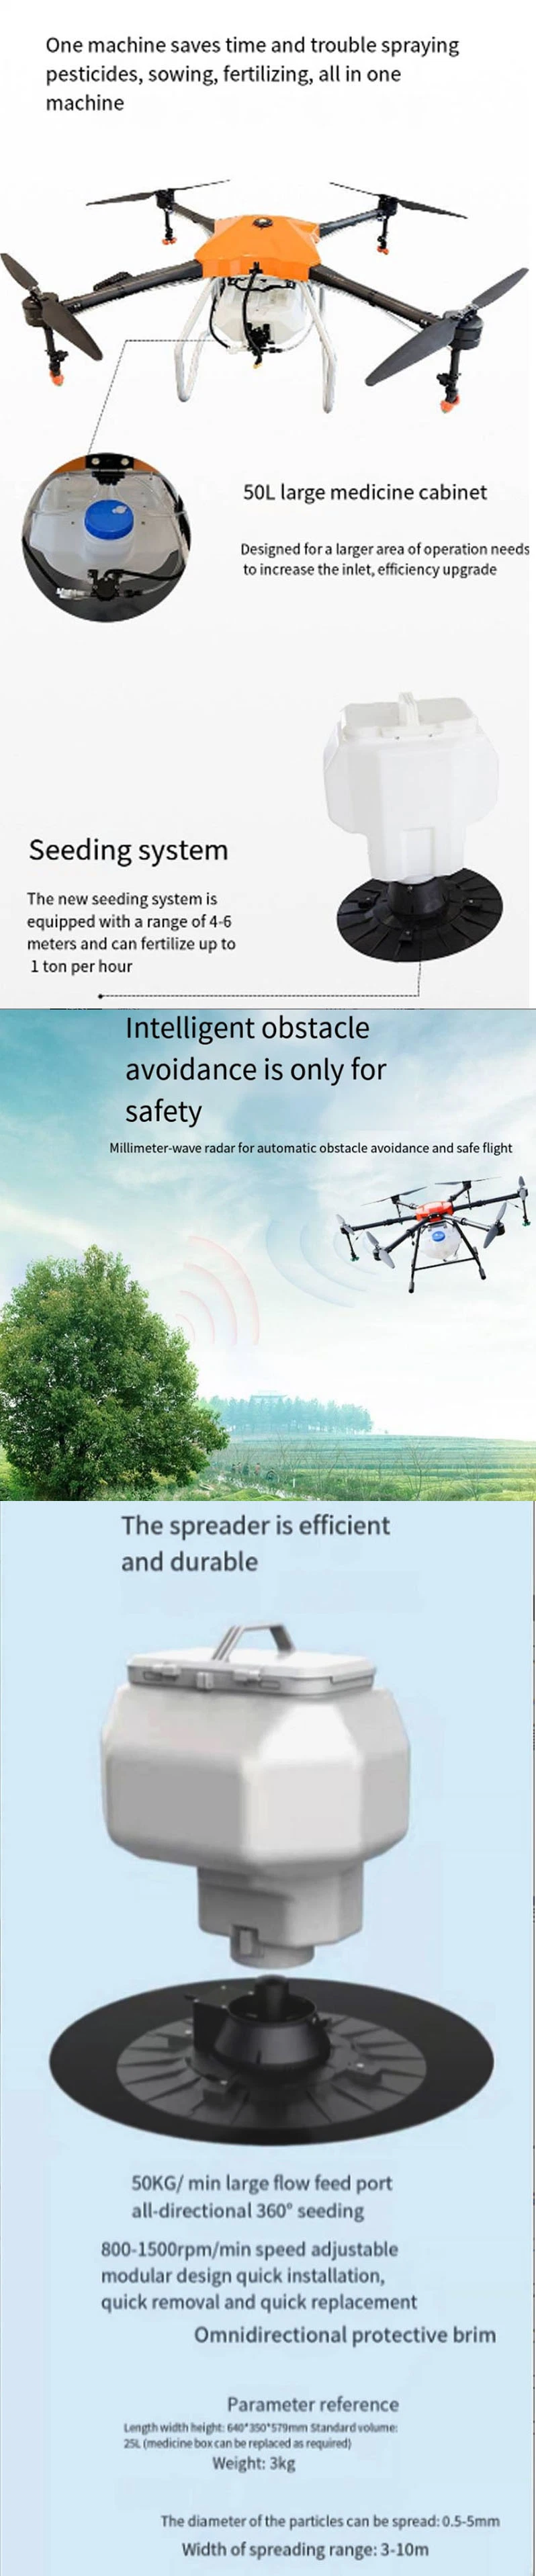 Agr 16 Liters Spraying Machines for Agriculture Purpose Drone Farming Equipment for Fumigation